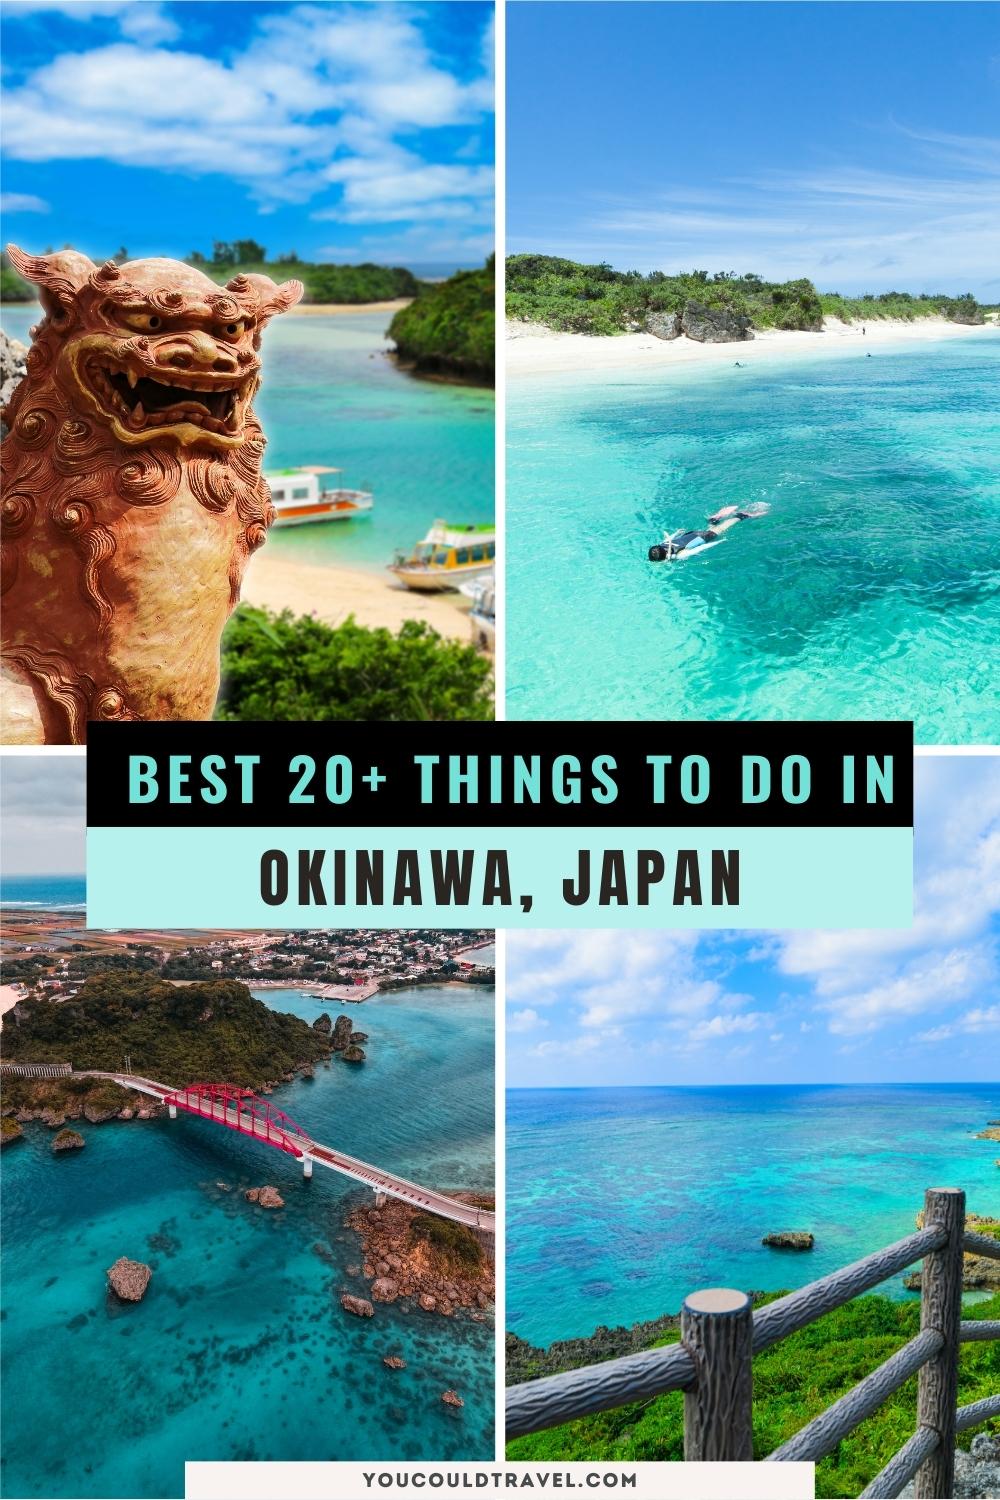 Things to do in Okinawa Japan